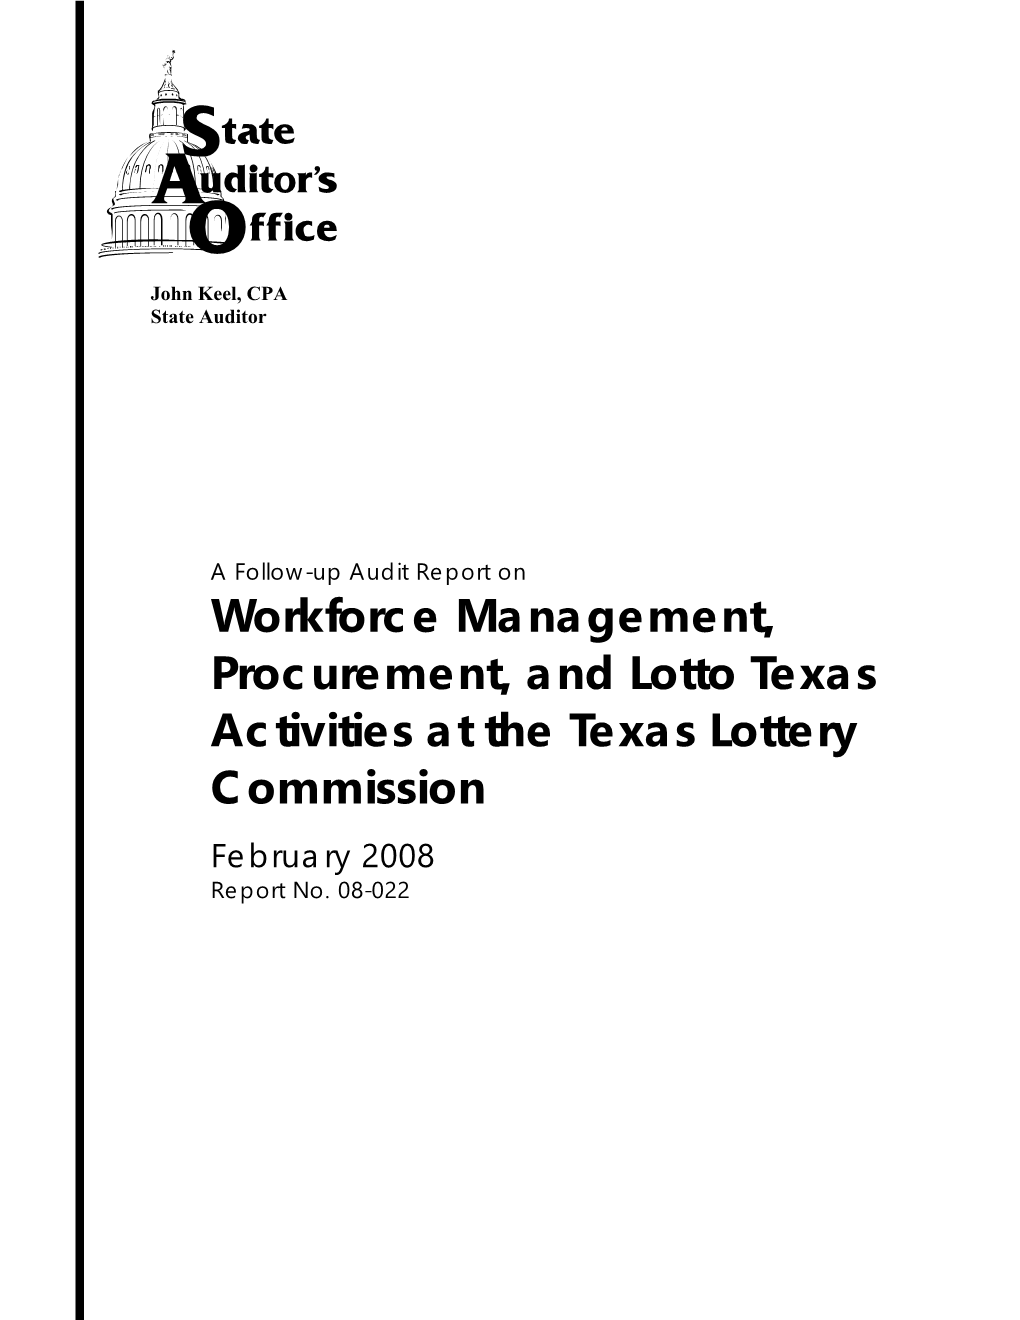 Workforce Management, Procurement, and Lotto Texas Activities at the Texas Lottery Commission February 2008 Report No